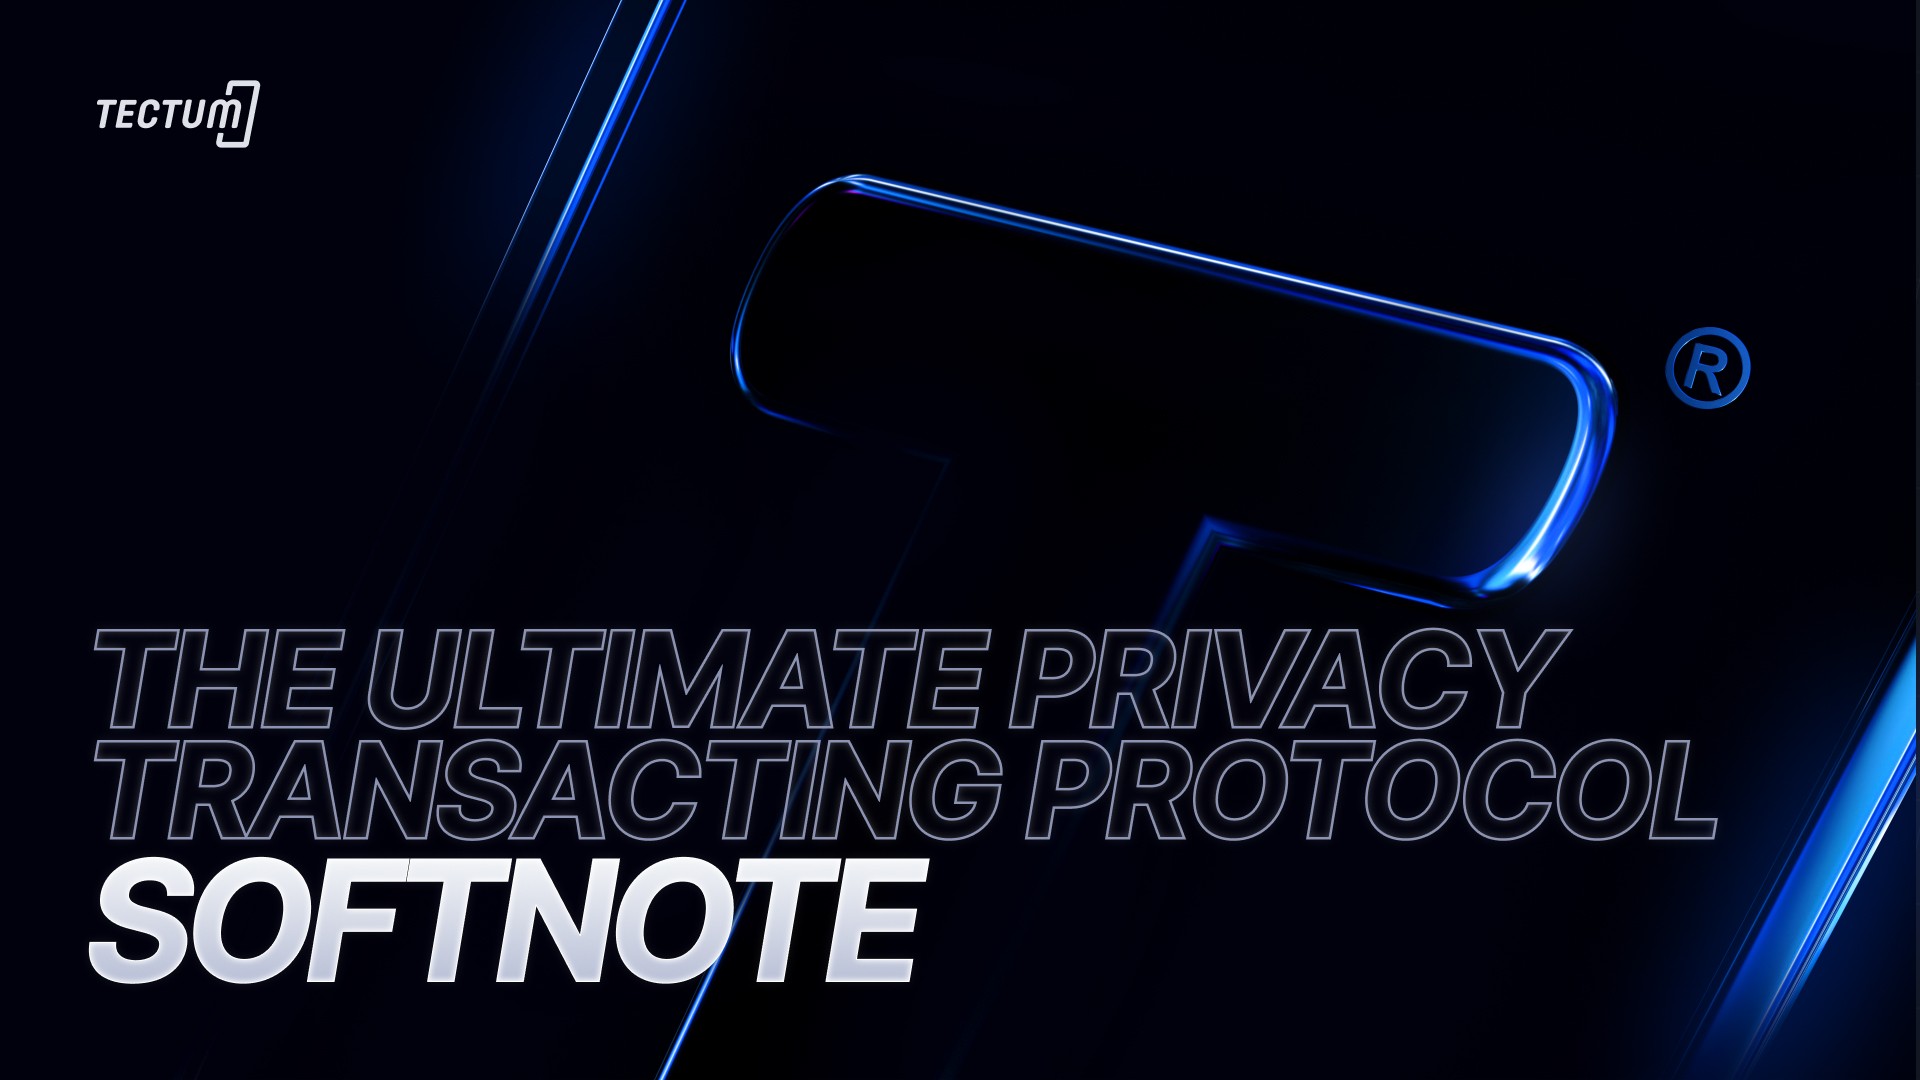 SoftNote – The Ultimate Privacy Transacting Protocol